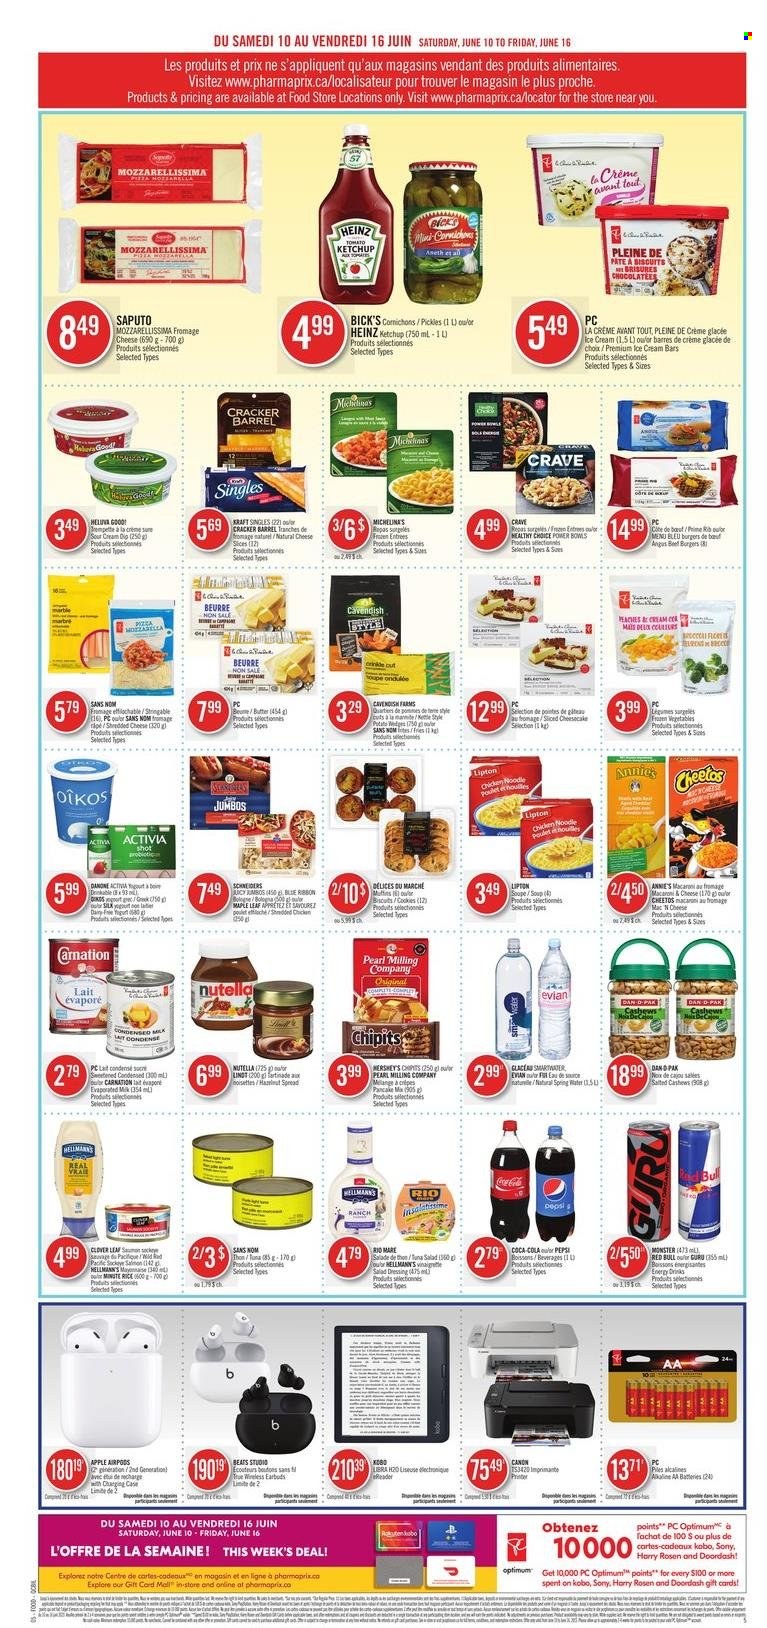 thumbnail - Pharmaprix Flyer - June 10, 2023 - June 16, 2023 - Sales products - Sony, Apple, macaroons, pancake mix, peaches, salmon, tuna, macaroni & cheese, pizza, soup, hamburger, Healthy Choice, Annie's, Kraft®, ready meal, bologna sausage, sandwich slices, shredded cheese, cheese, Kraft Singles, Clover, Activia, Oikos, condensed milk, Silk, sour cream, Hellmann’s, ice cream, ice cream bars, Hershey's, frozen vegetables, potato fries, potato wedges, cookies, Mars, crackers, Cheetos, salty snack, pickles, pickled gherkins, cornichons, rice, salad dressing, vinaigrette dressing, dressing, cashews, Coca-Cola, Pepsi, energy drink, Monster, soft drink, Red Bull, spring water, Smartwater, Evian, water, Optimum, Beats, Airpods, earbuds, printer, Canon, Heinz, ketchup, Nutella, Danone, Lipton. Page 4.